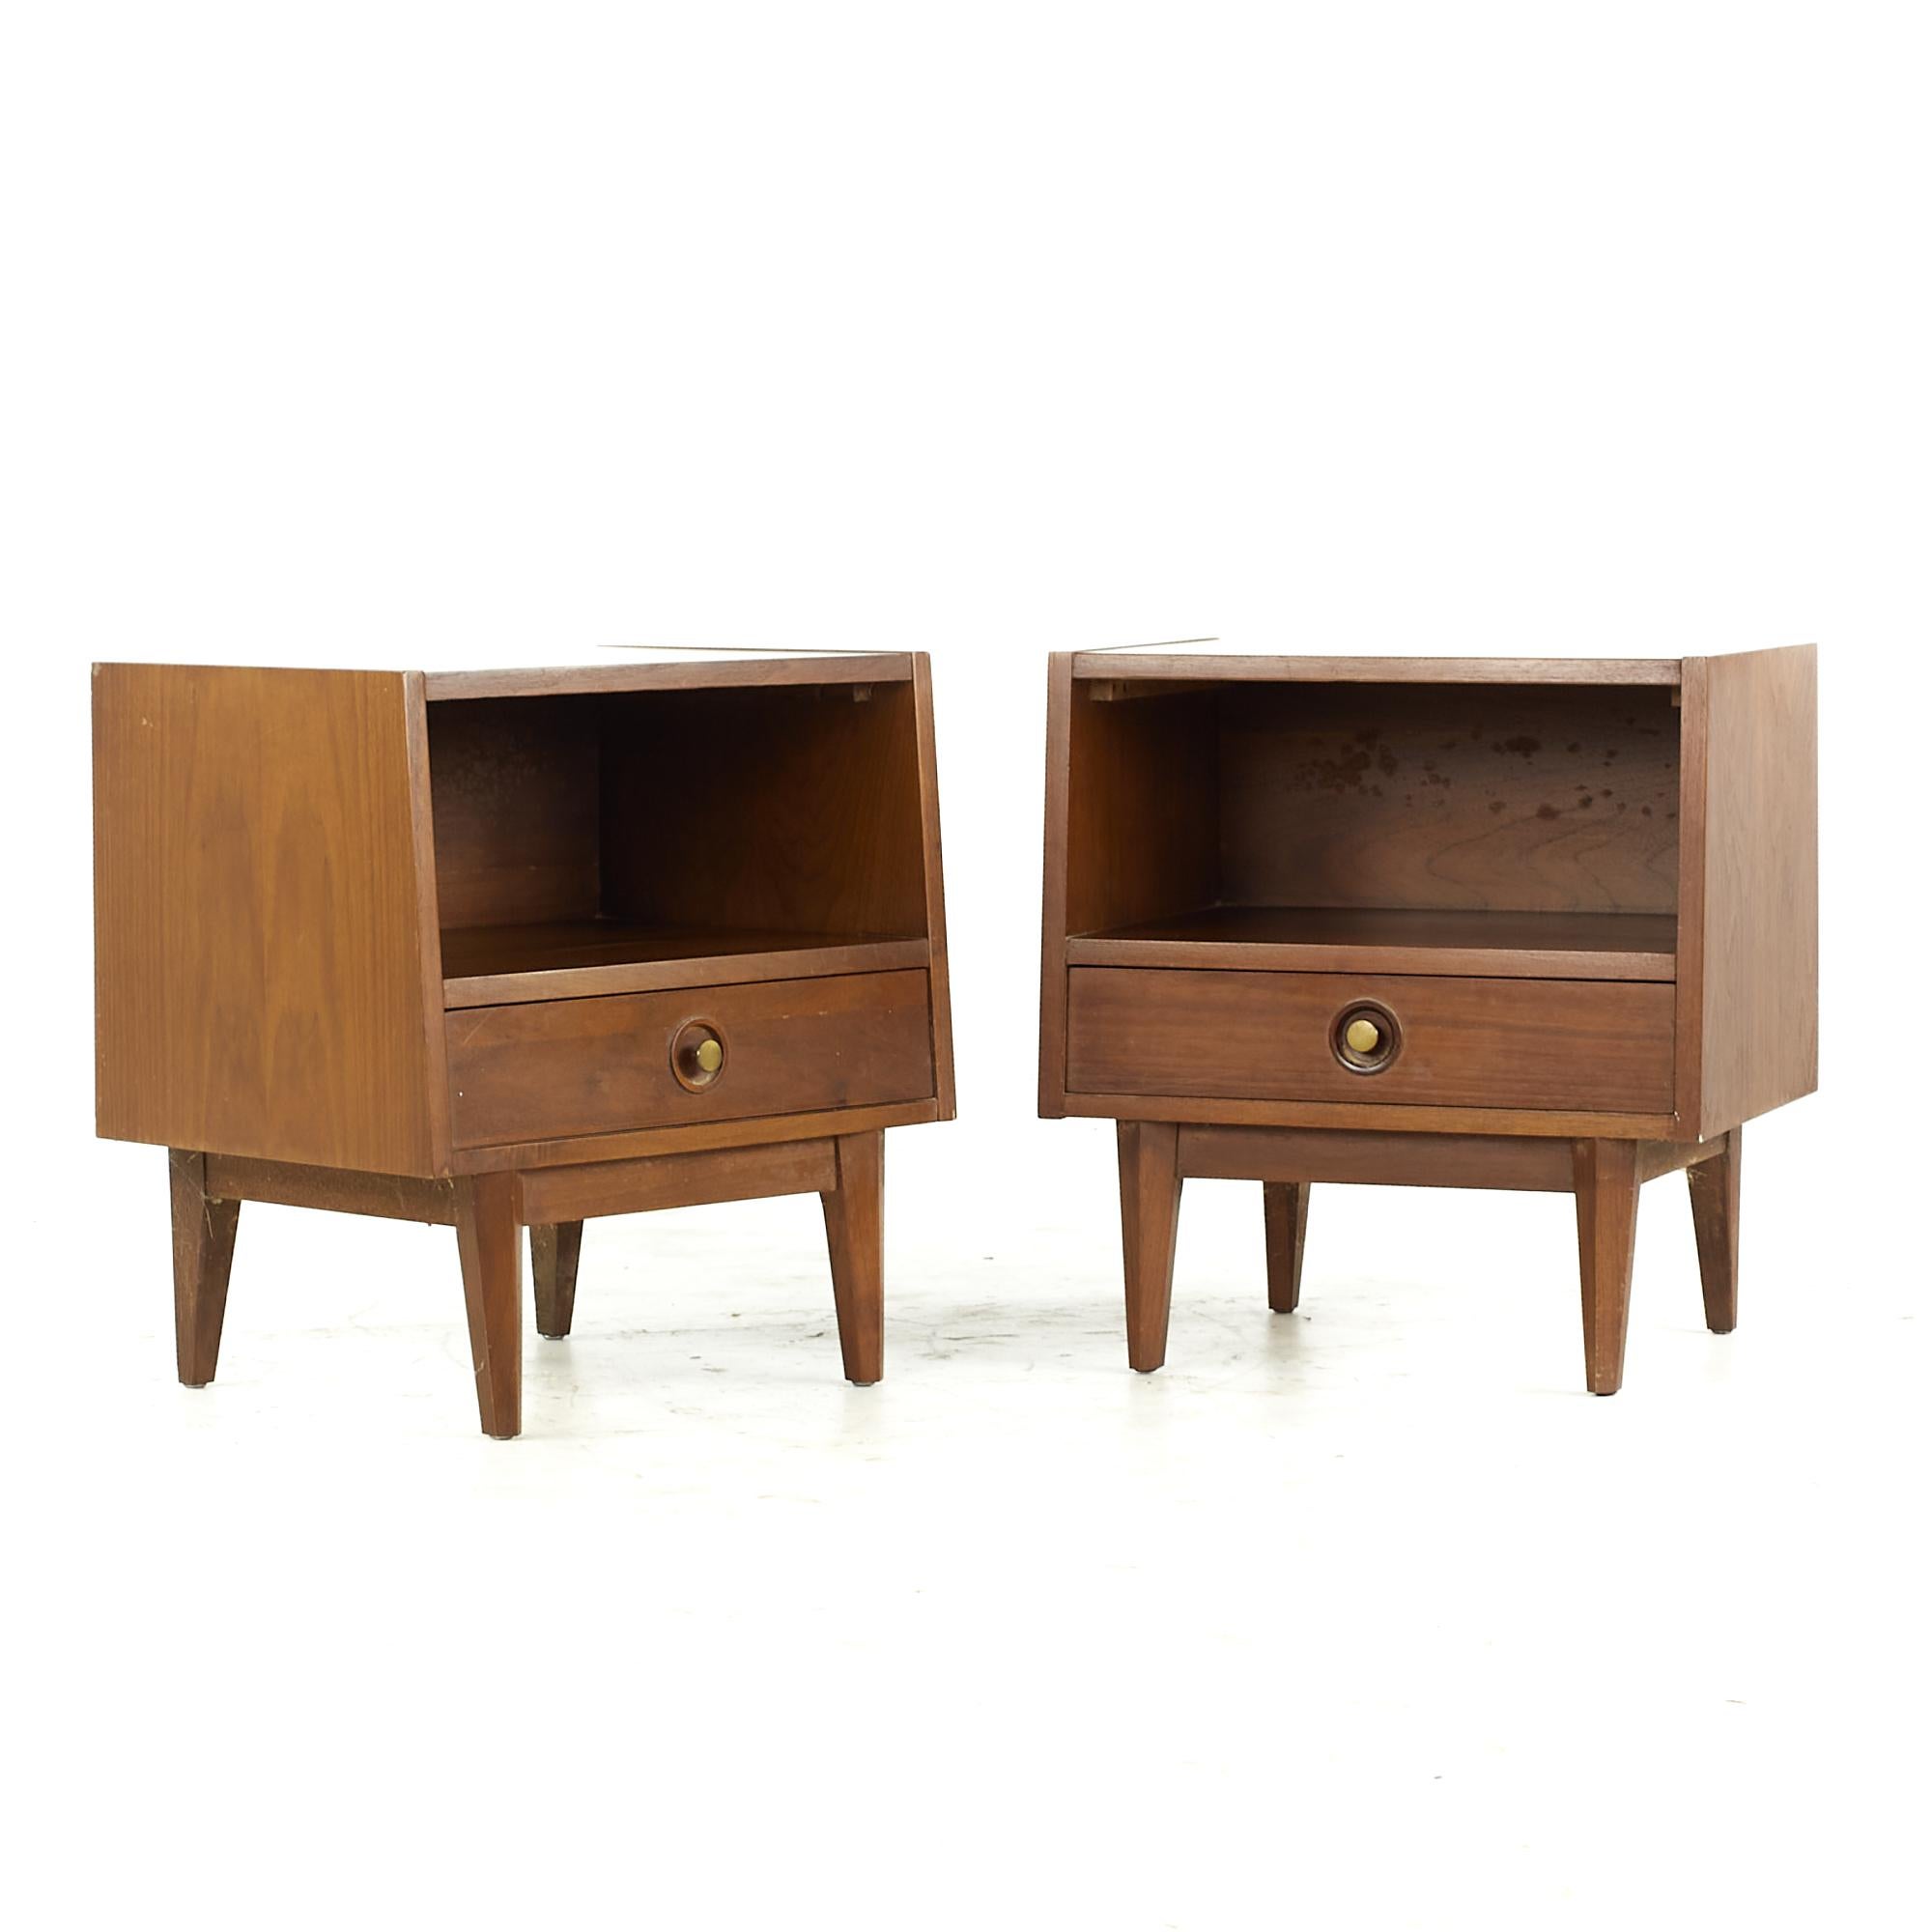 Albert Parvin for American of Martinsville Mid Century Walnut and Brass Nightstands - Pair

Each nightstand measures: 24 wide x 16 deep x 23.25 inches high

All pieces of furniture can be had in what we call restored vintage condition. That